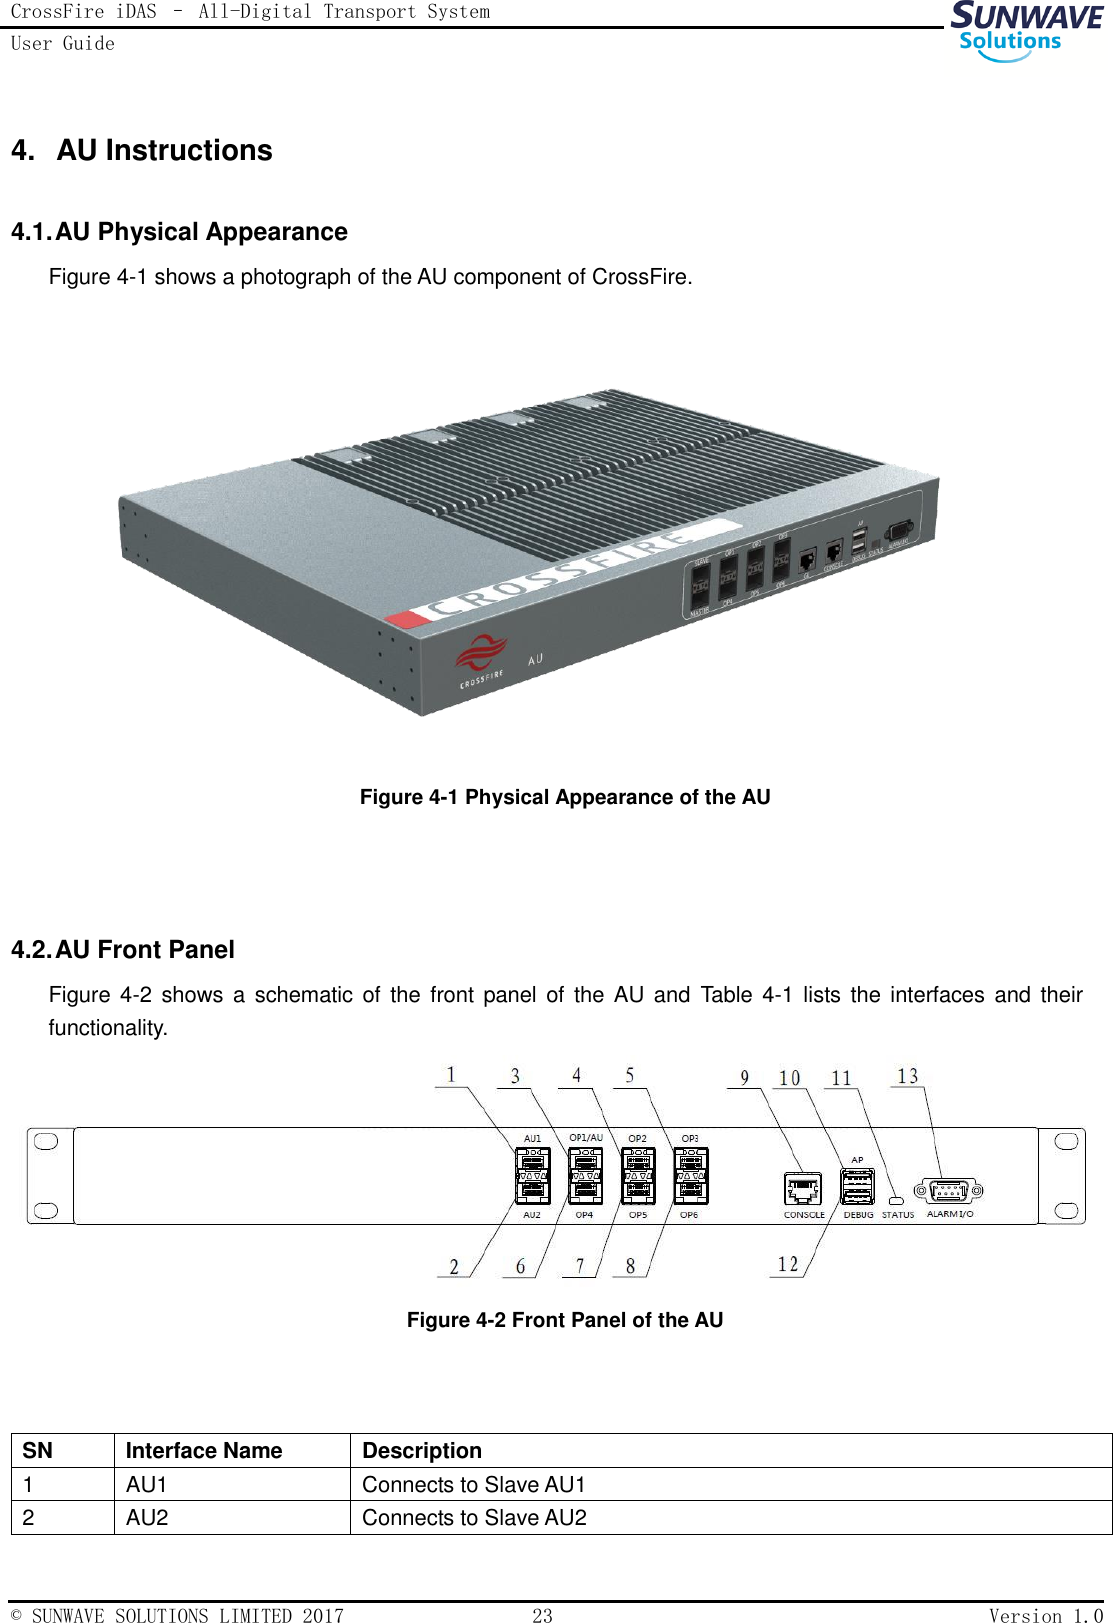 CrossFire iDAS – All-Digital Transport System User Guide   © SUNWAVE SOLUTIONS LIMITED 2017  23  Version 1.0  4.  AU Instructions 4.1. AU Physical Appearance Figure 4-1 shows a photograph of the AU component of CrossFire.  Figure 4-1 Physical Appearance of the AU   4.2. AU Front Panel Figure 4-2  shows a  schematic of the  front panel of  the AU  and  Table  4-1 lists the  interfaces  and their functionality.  Figure 4-2 Front Panel of the AU   SN Interface Name Description 1 AU1 Connects to Slave AU1 2 AU2 Connects to Slave AU2 